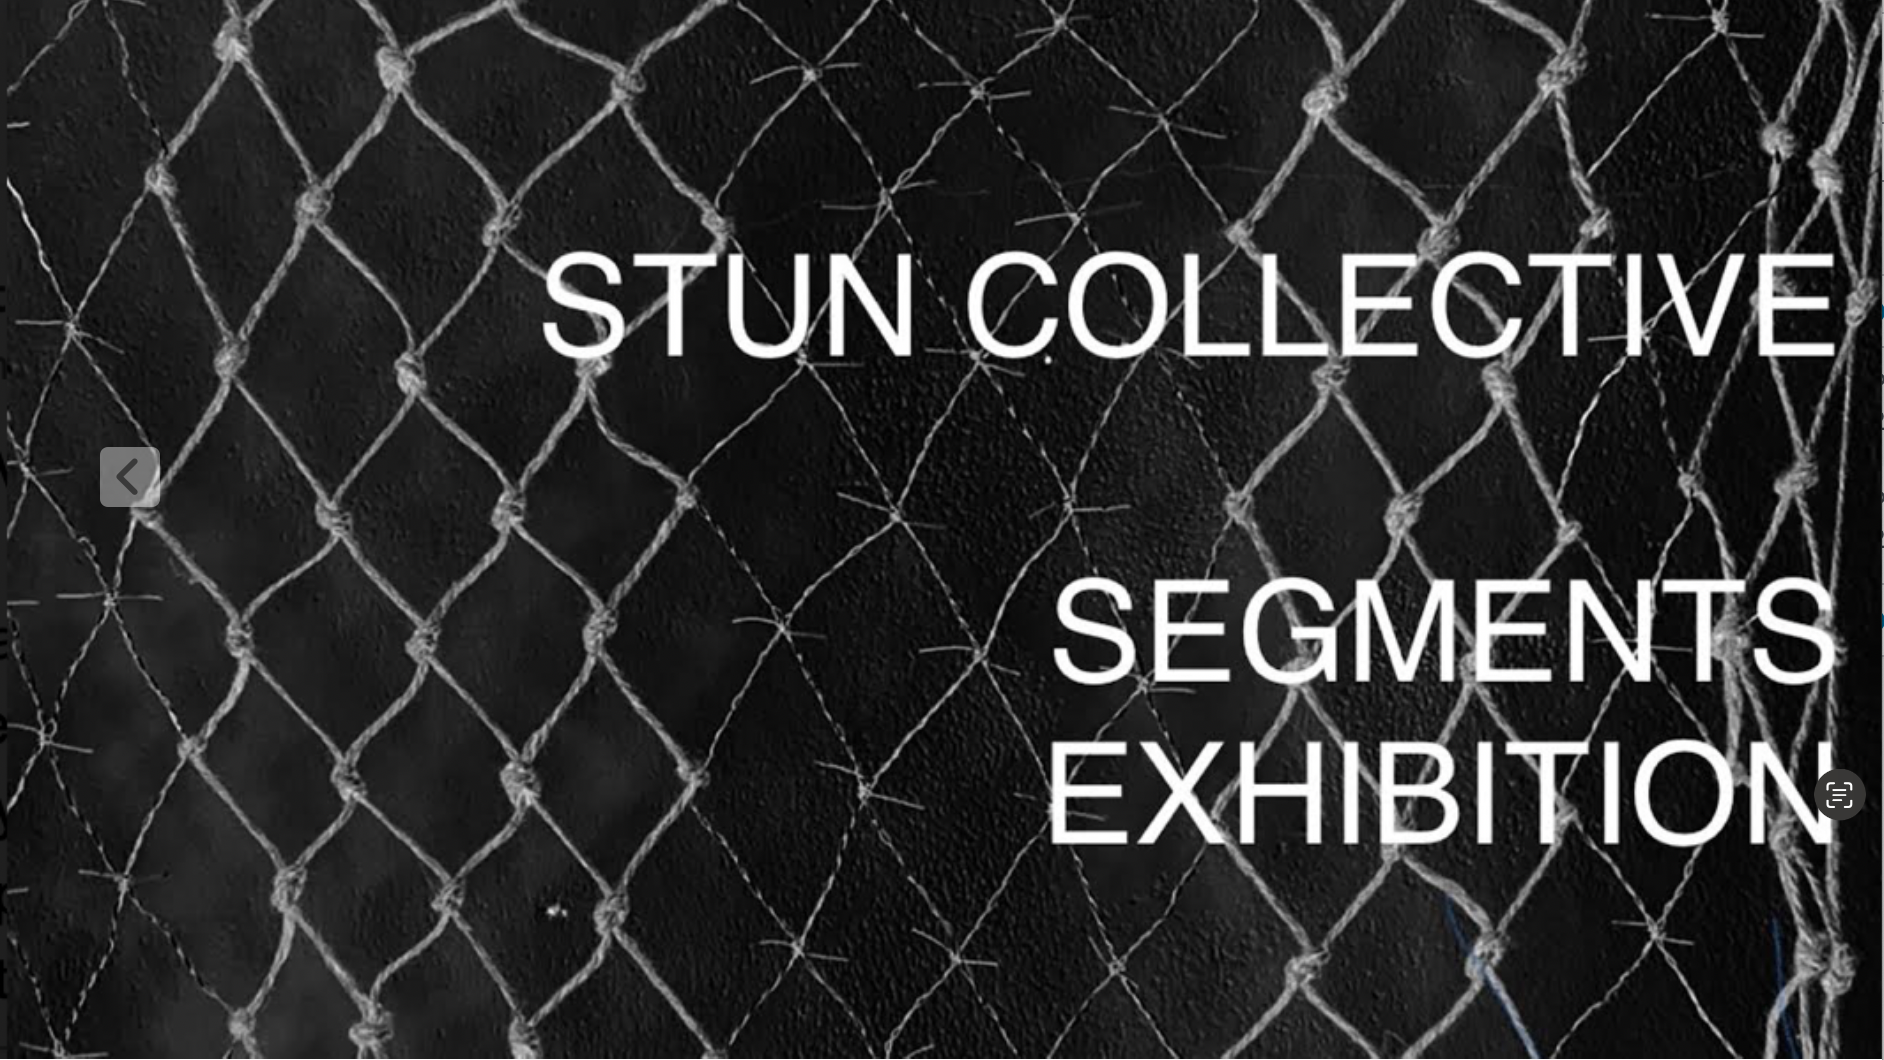 Segments curated by Stun Collective